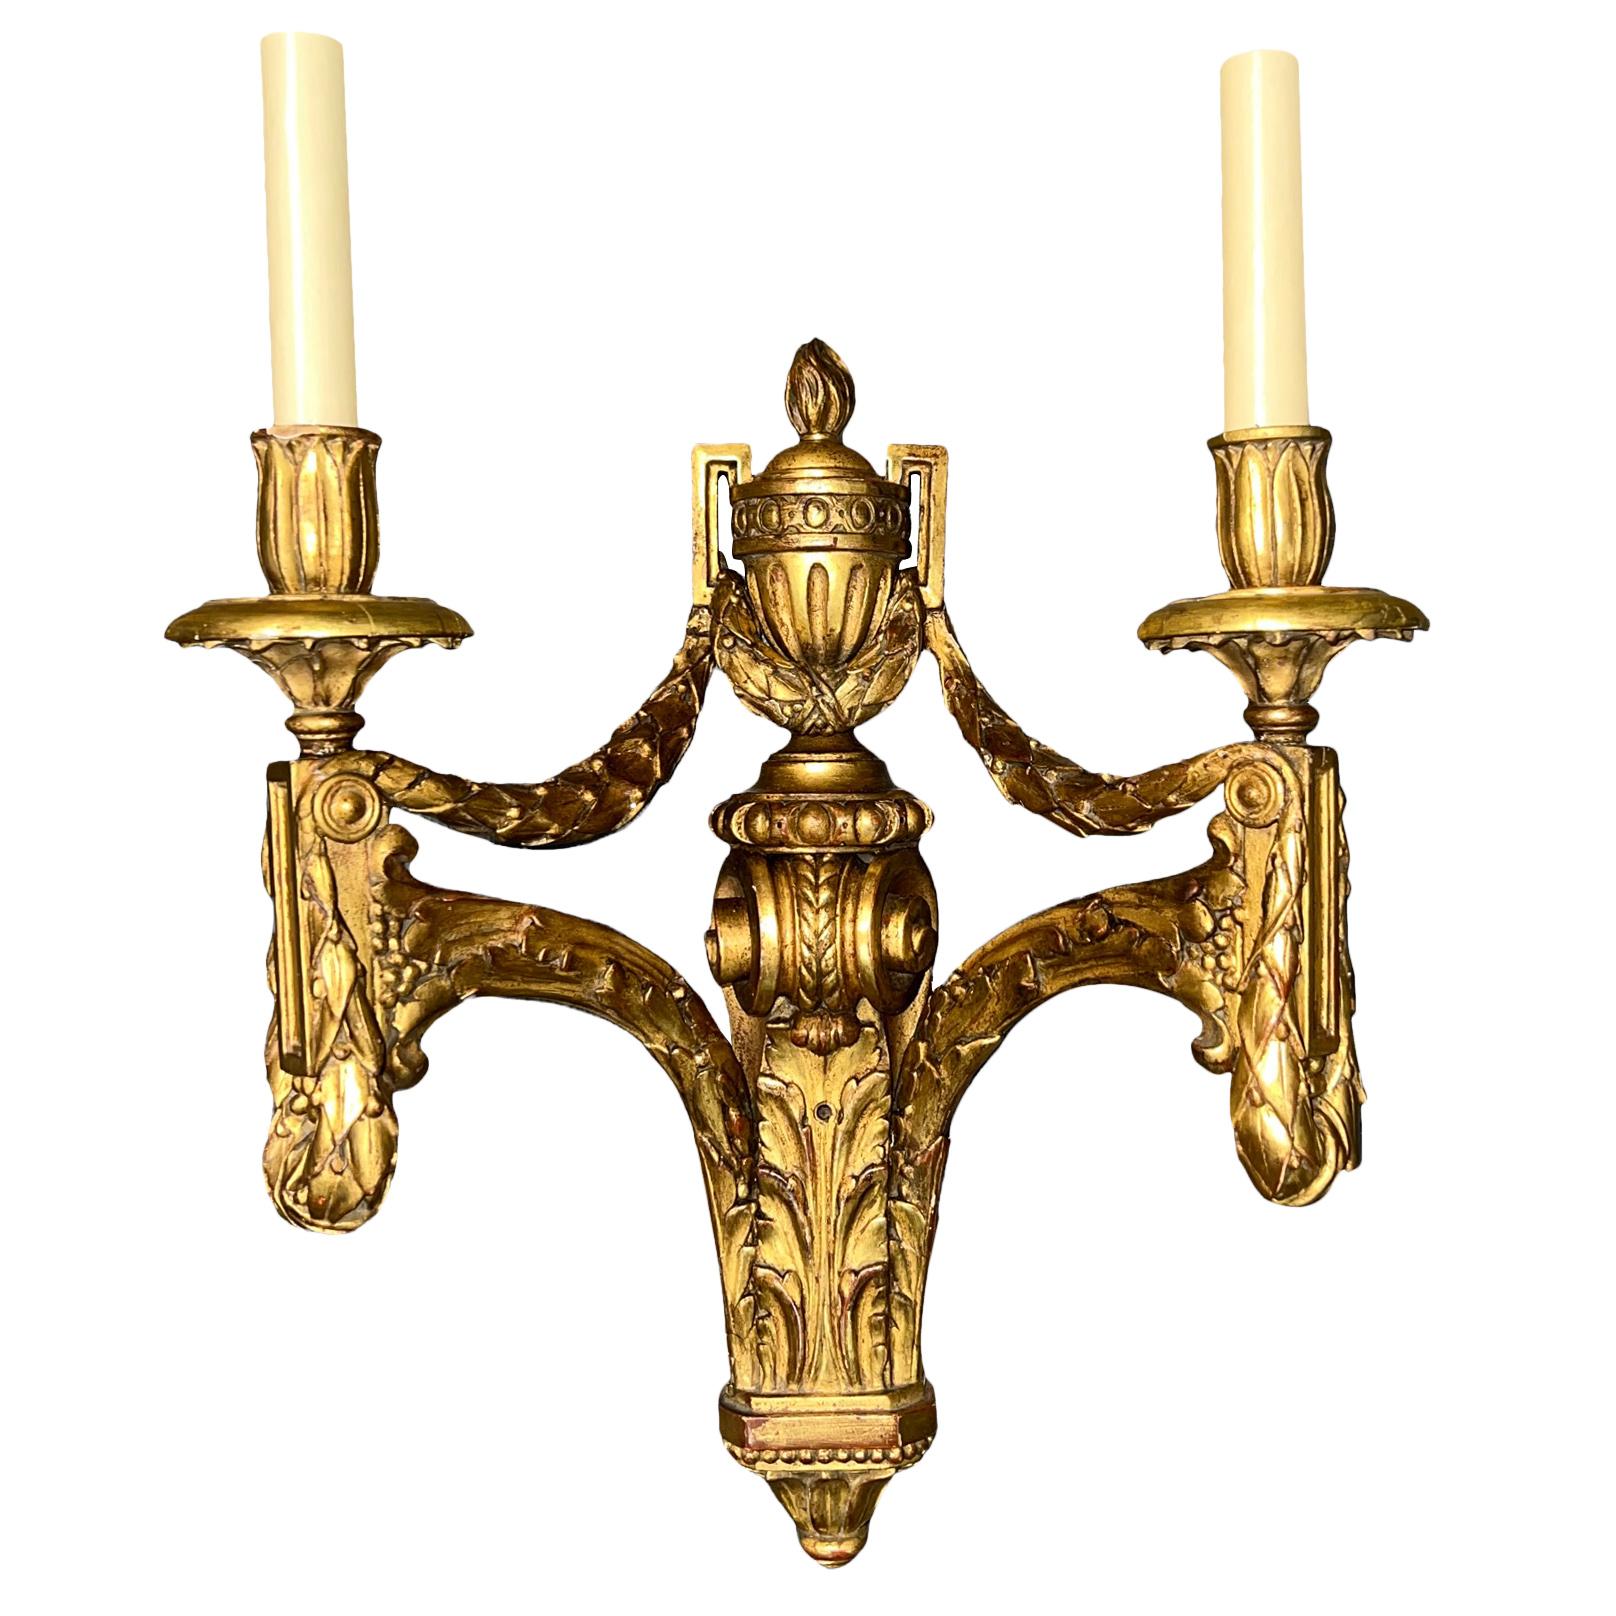 A set of four circa 1900's Italian carved and gilt wood sconces. Sold in pairs.

Measurements:
Height: 18